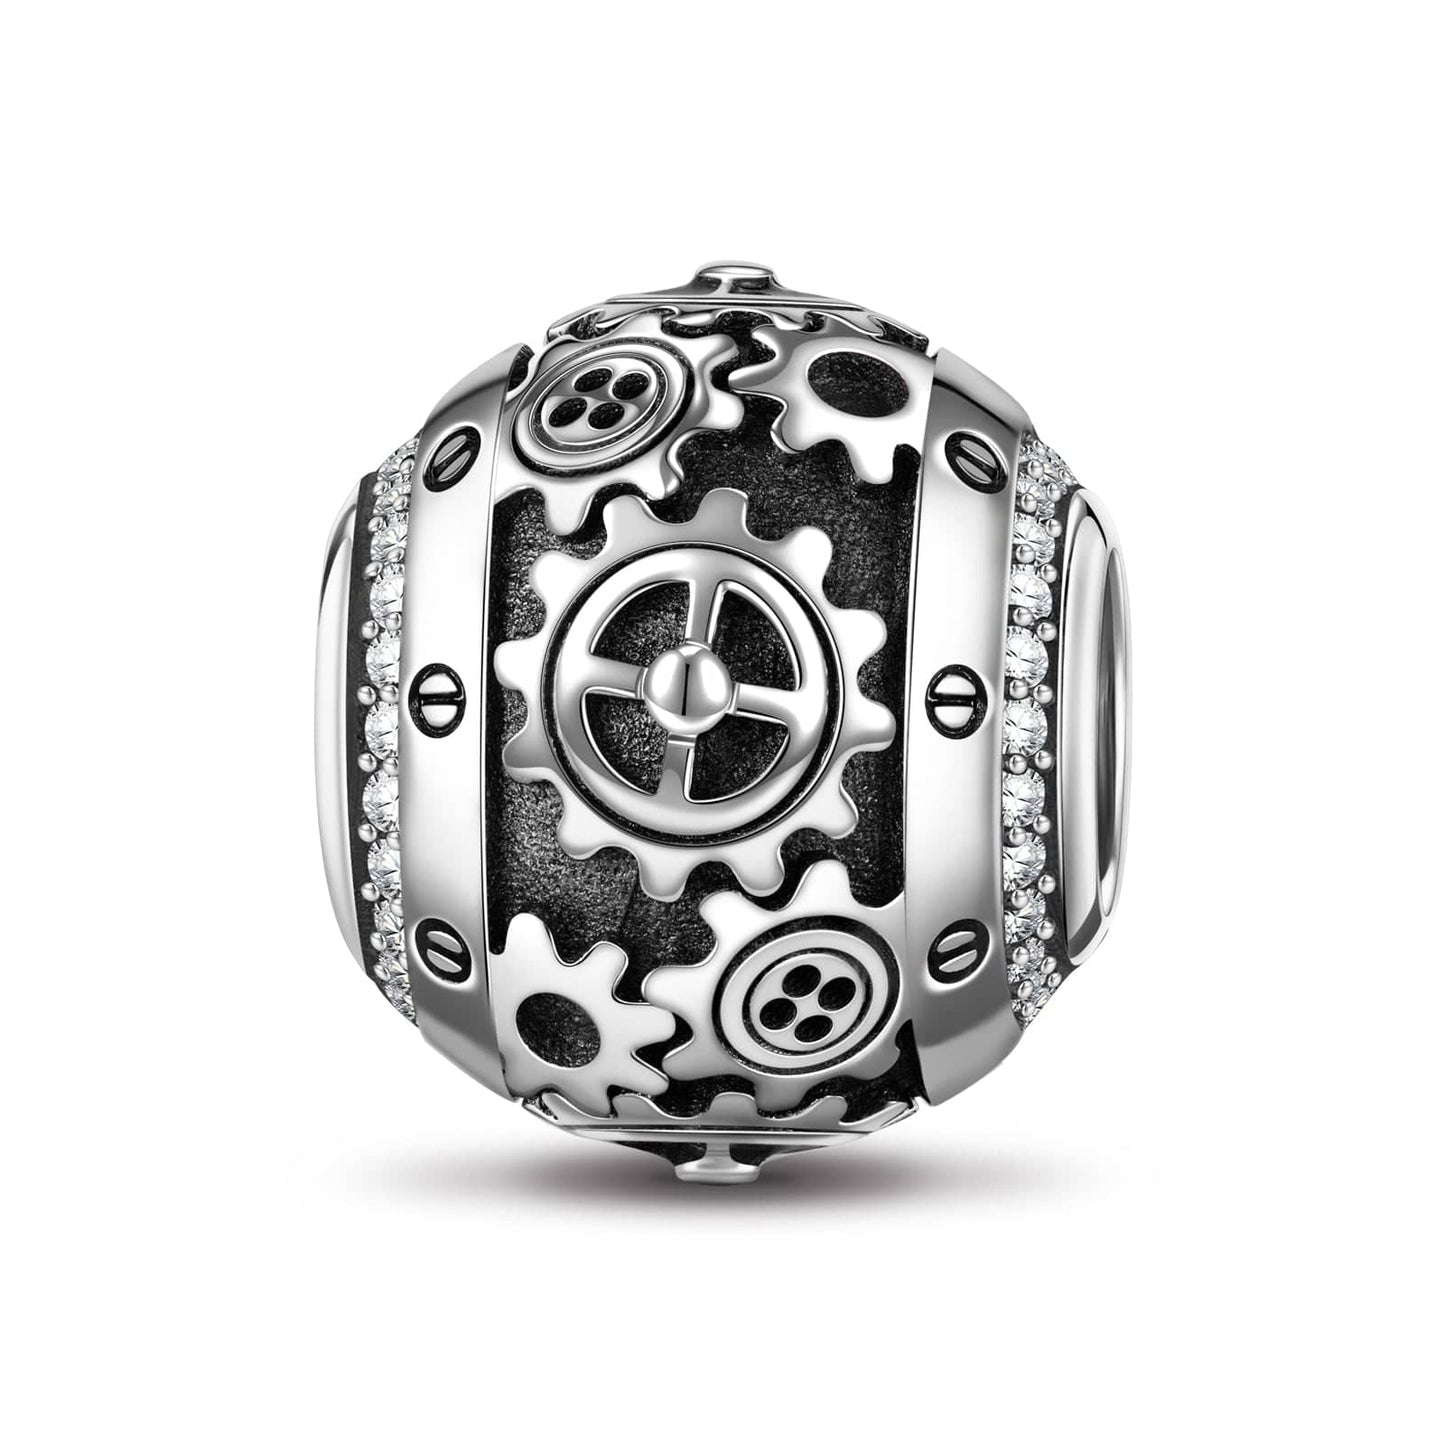 Sterling Silver XL Size Mechanical Beauty Charms With Enamel In Blackened 925 Sterling Silver Plated For Men